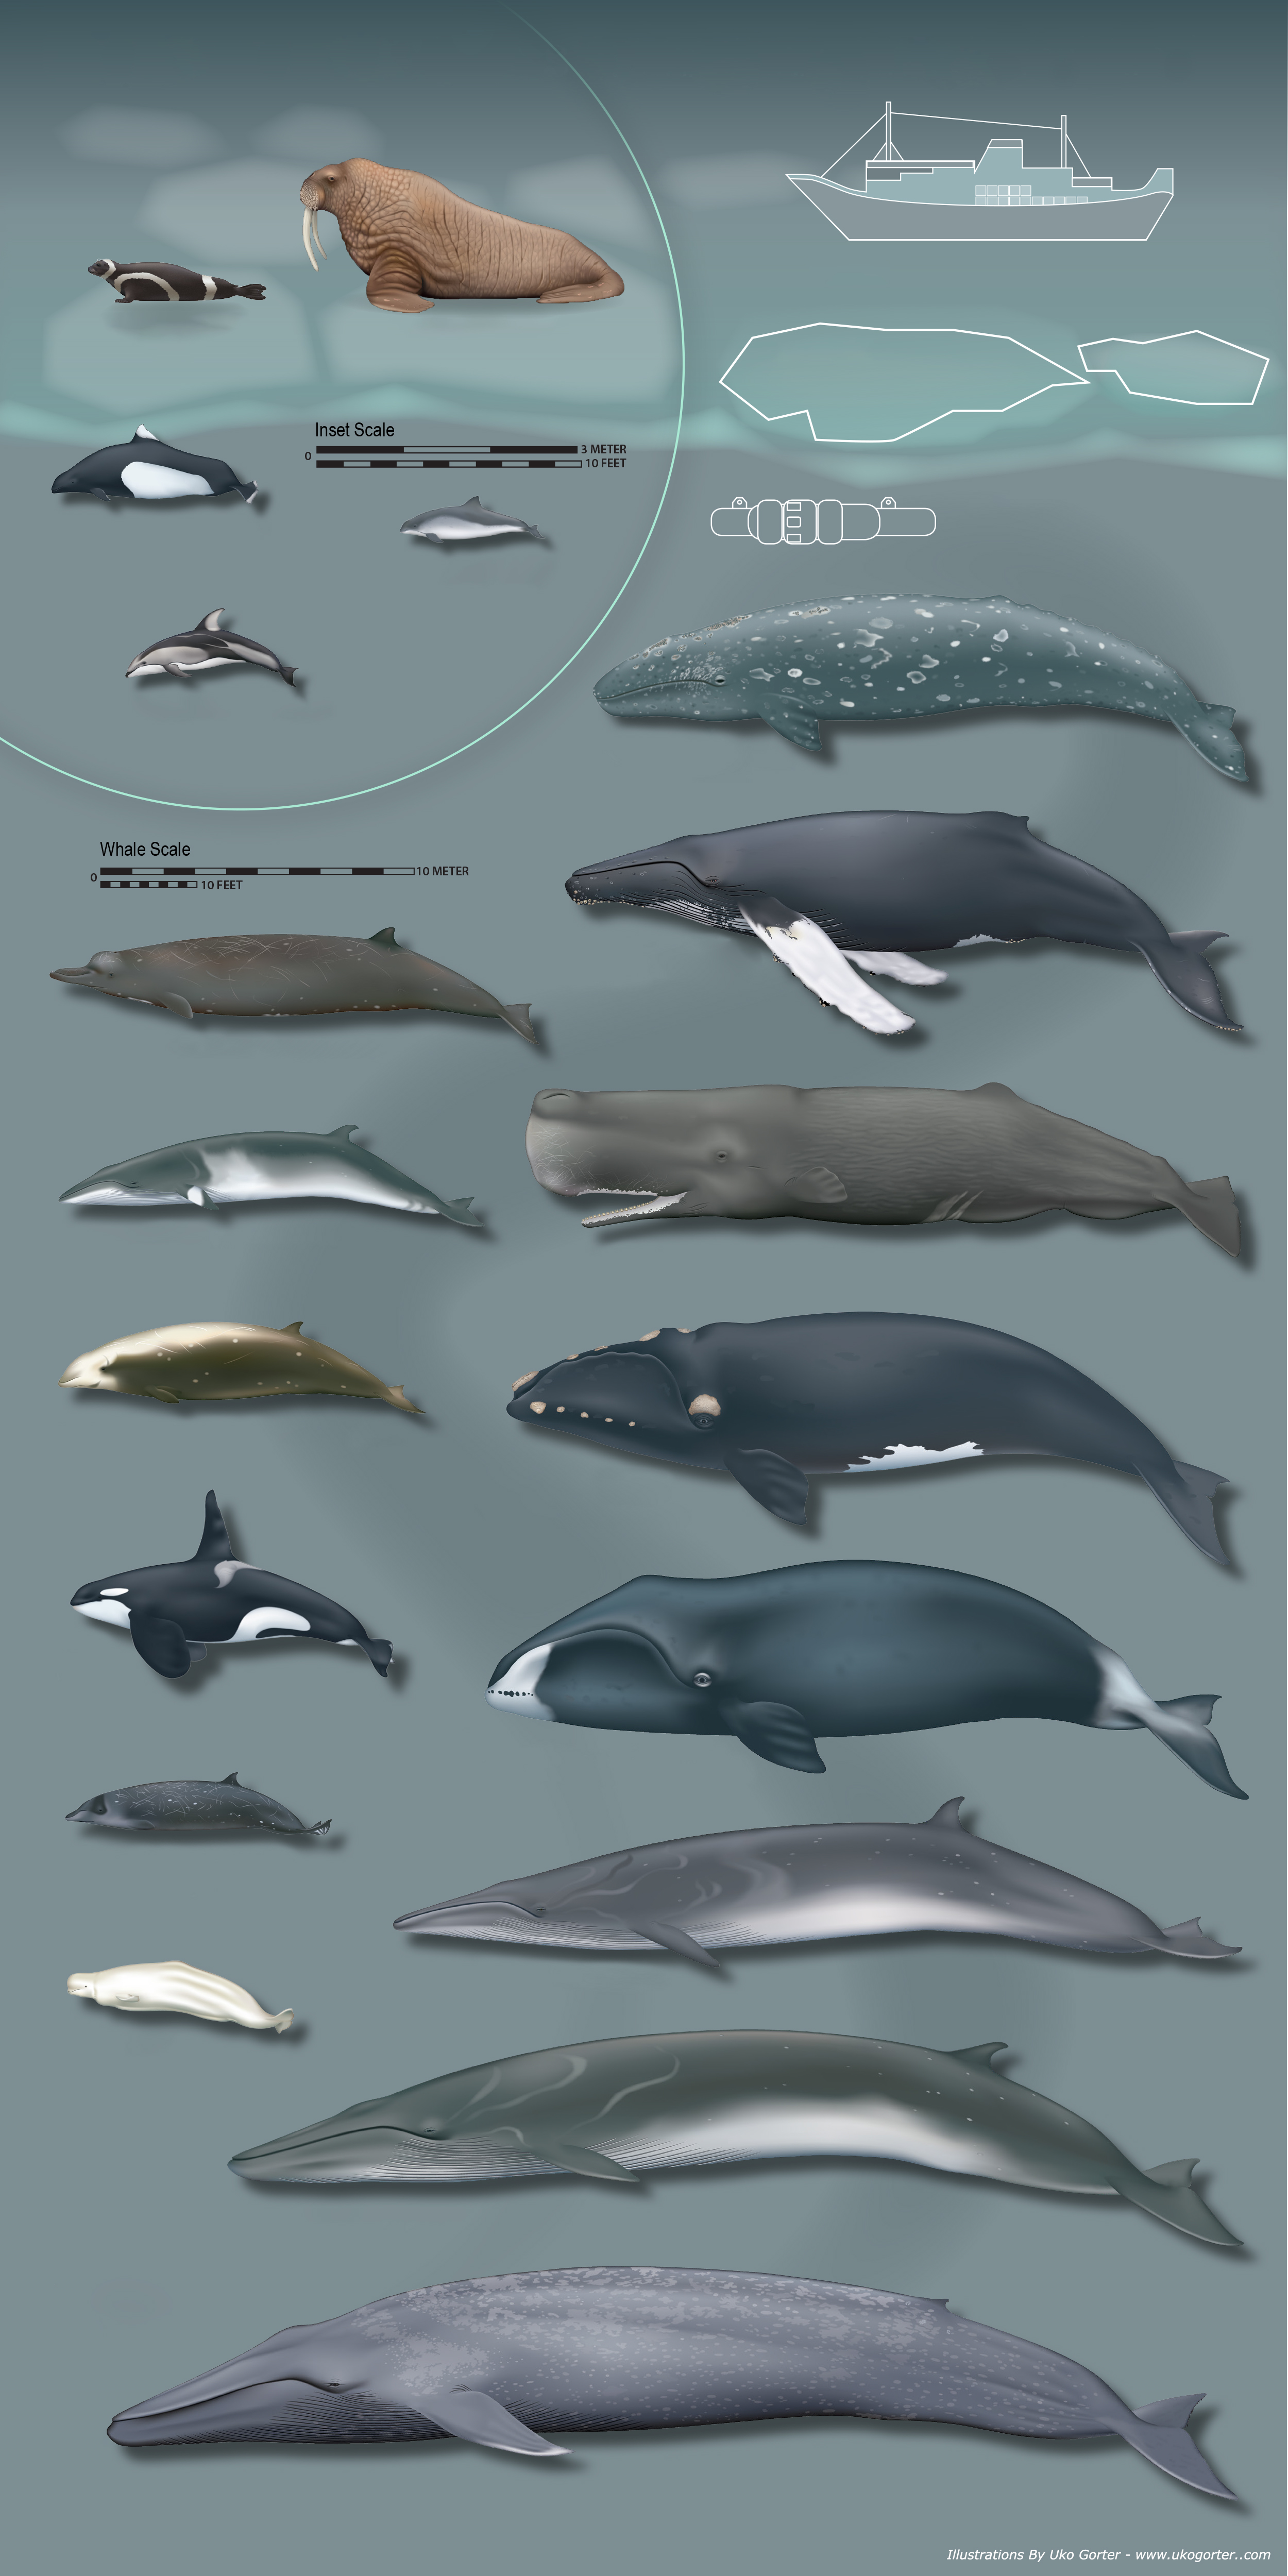 Marine Mammal Acoustic Sounds infographic featuring illustrations of Alaskan marine mammals, sea ice, and man-made sources of marine sound.